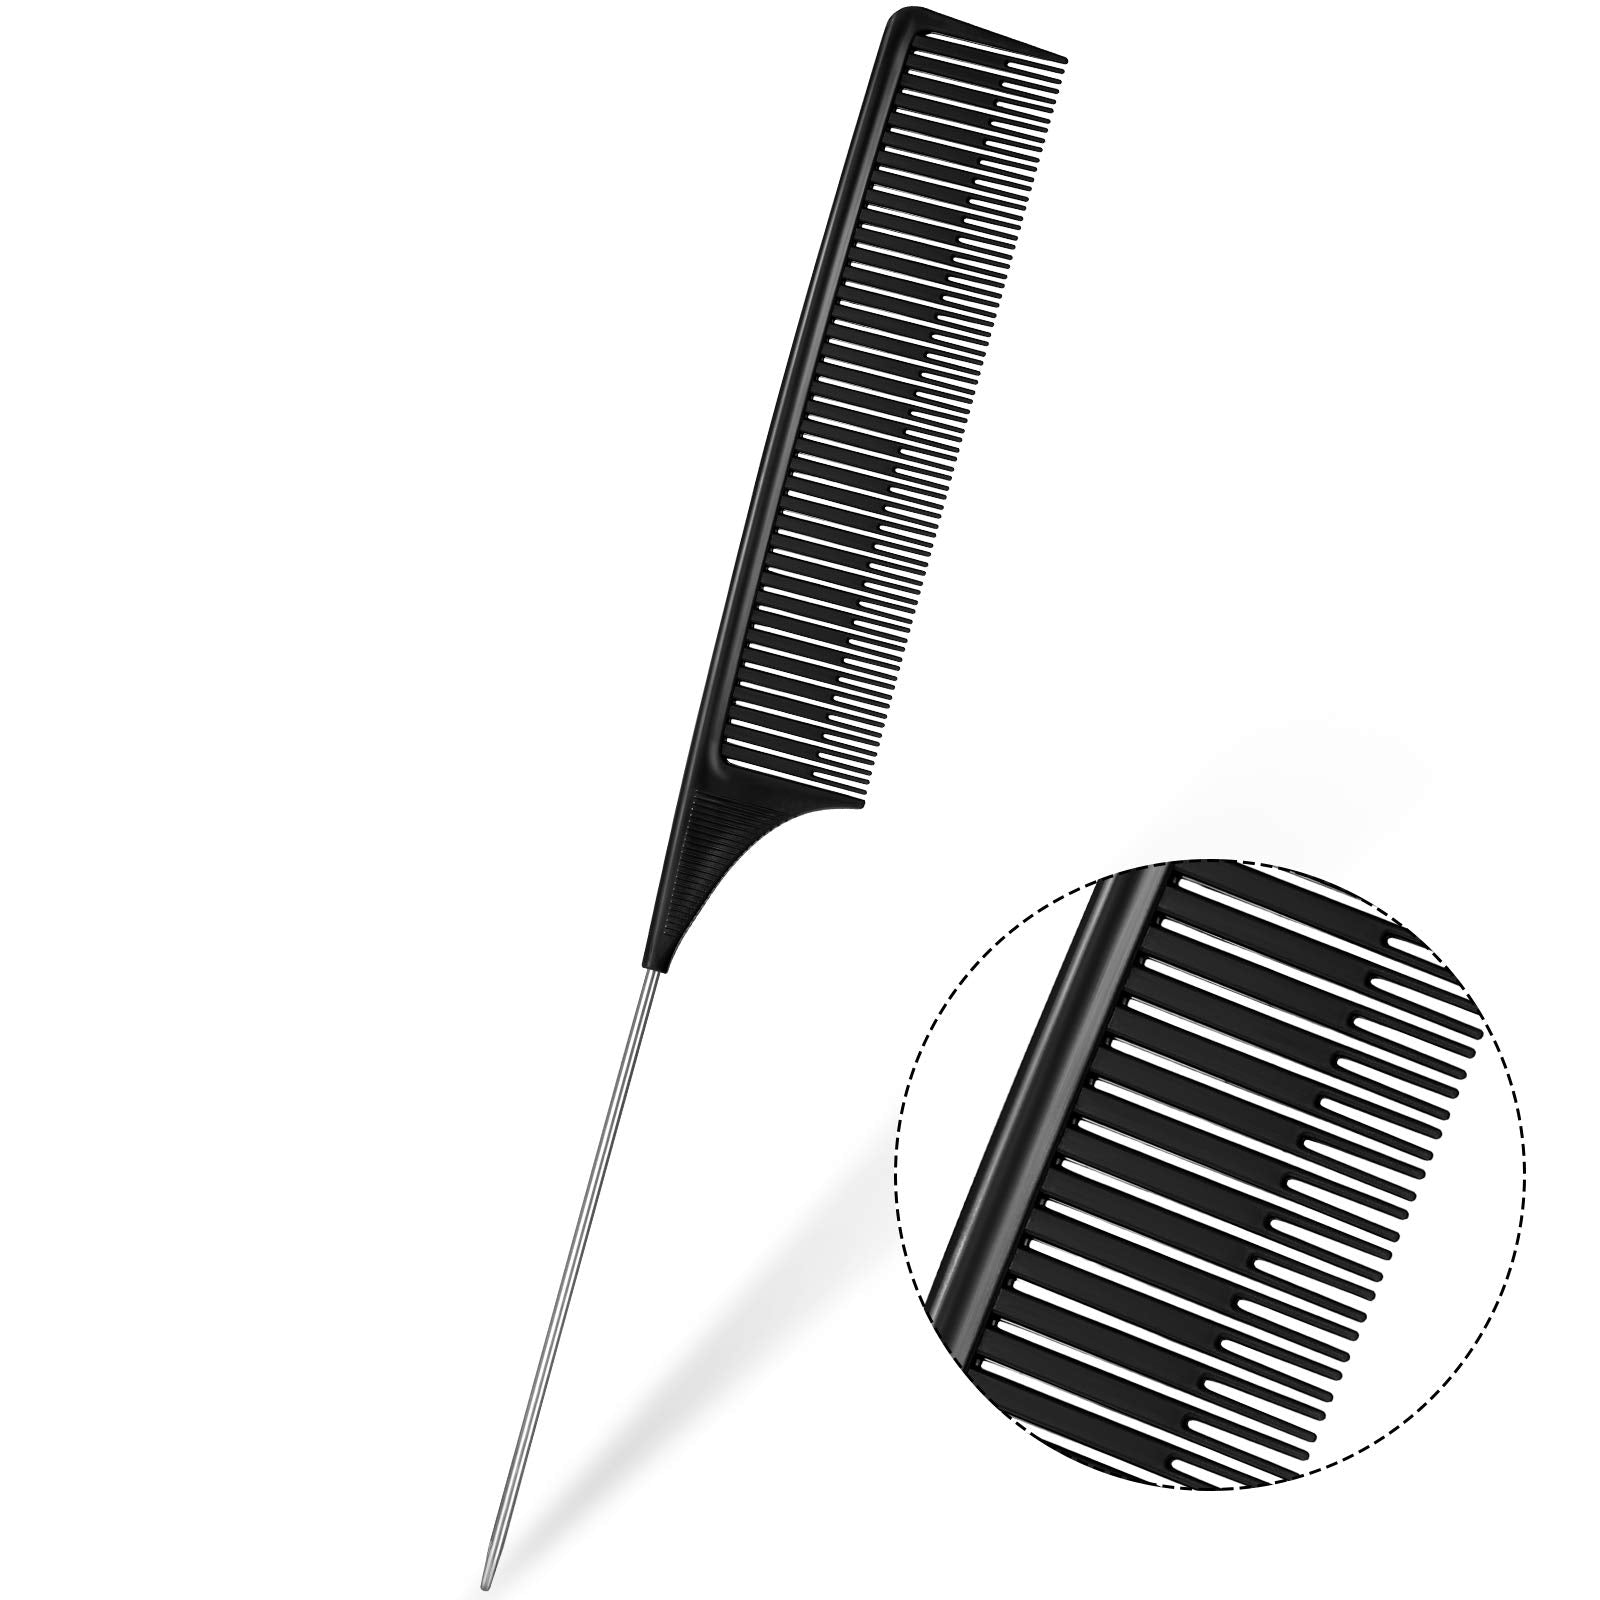 Coloring Highlighting Comb Rat Tail Comb Stainless Steel Pintail Comb Teasing Parting Styling Comb for Salon Home, Black